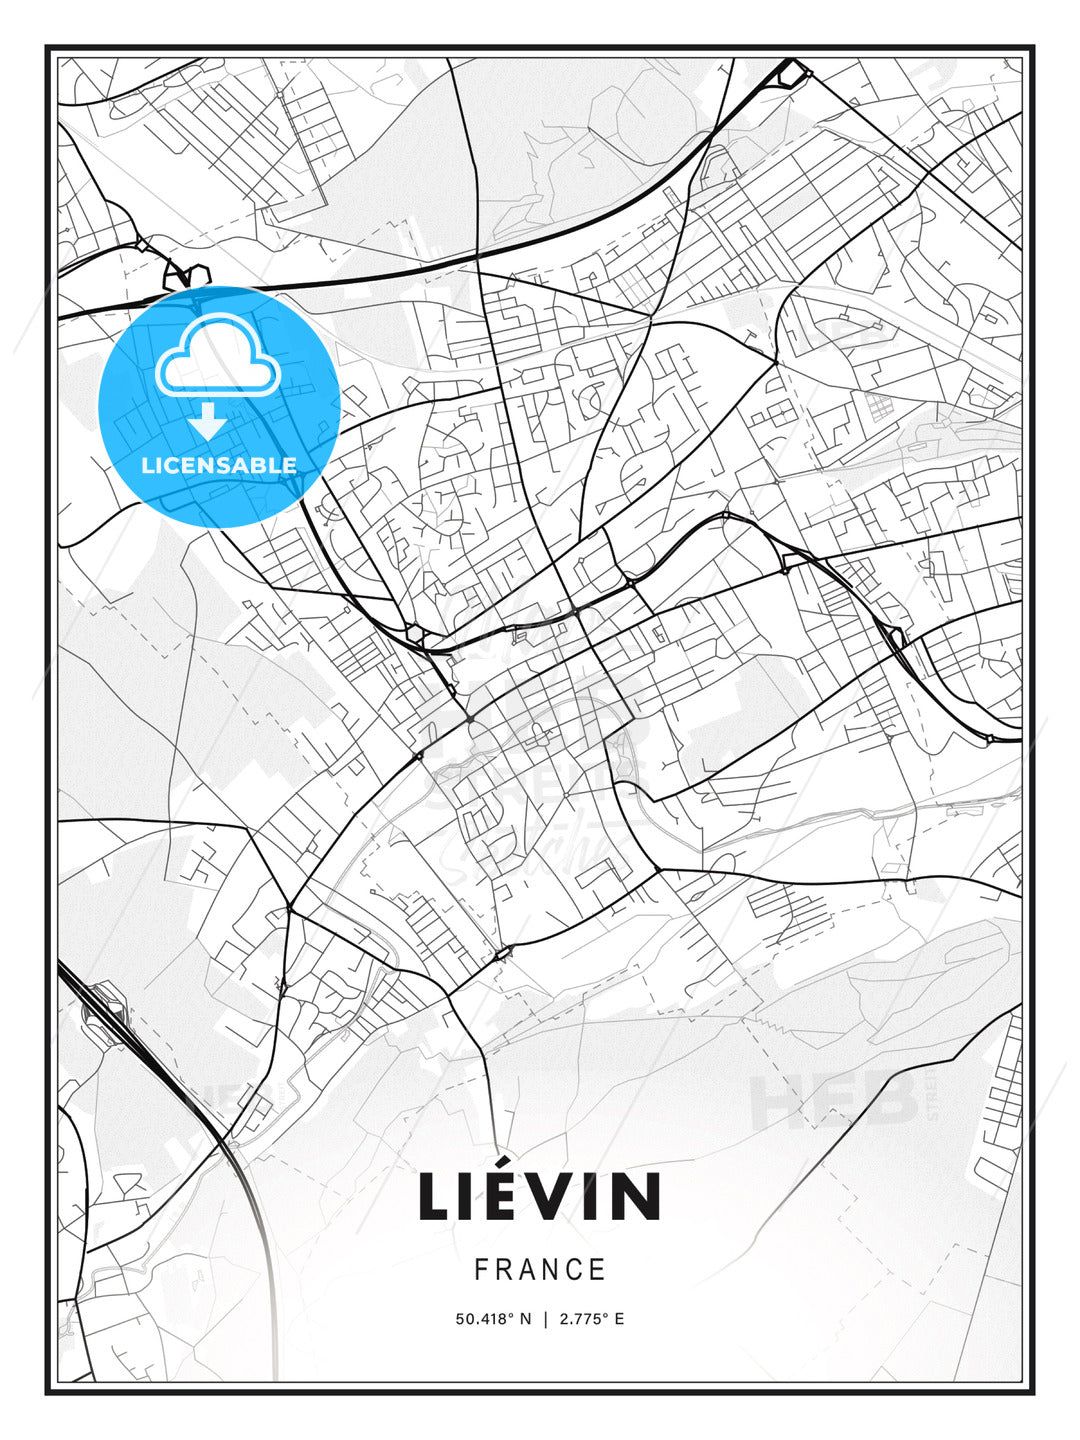 Liévin, France, Modern Print Template in Various Formats - HEBSTREITS Sketches